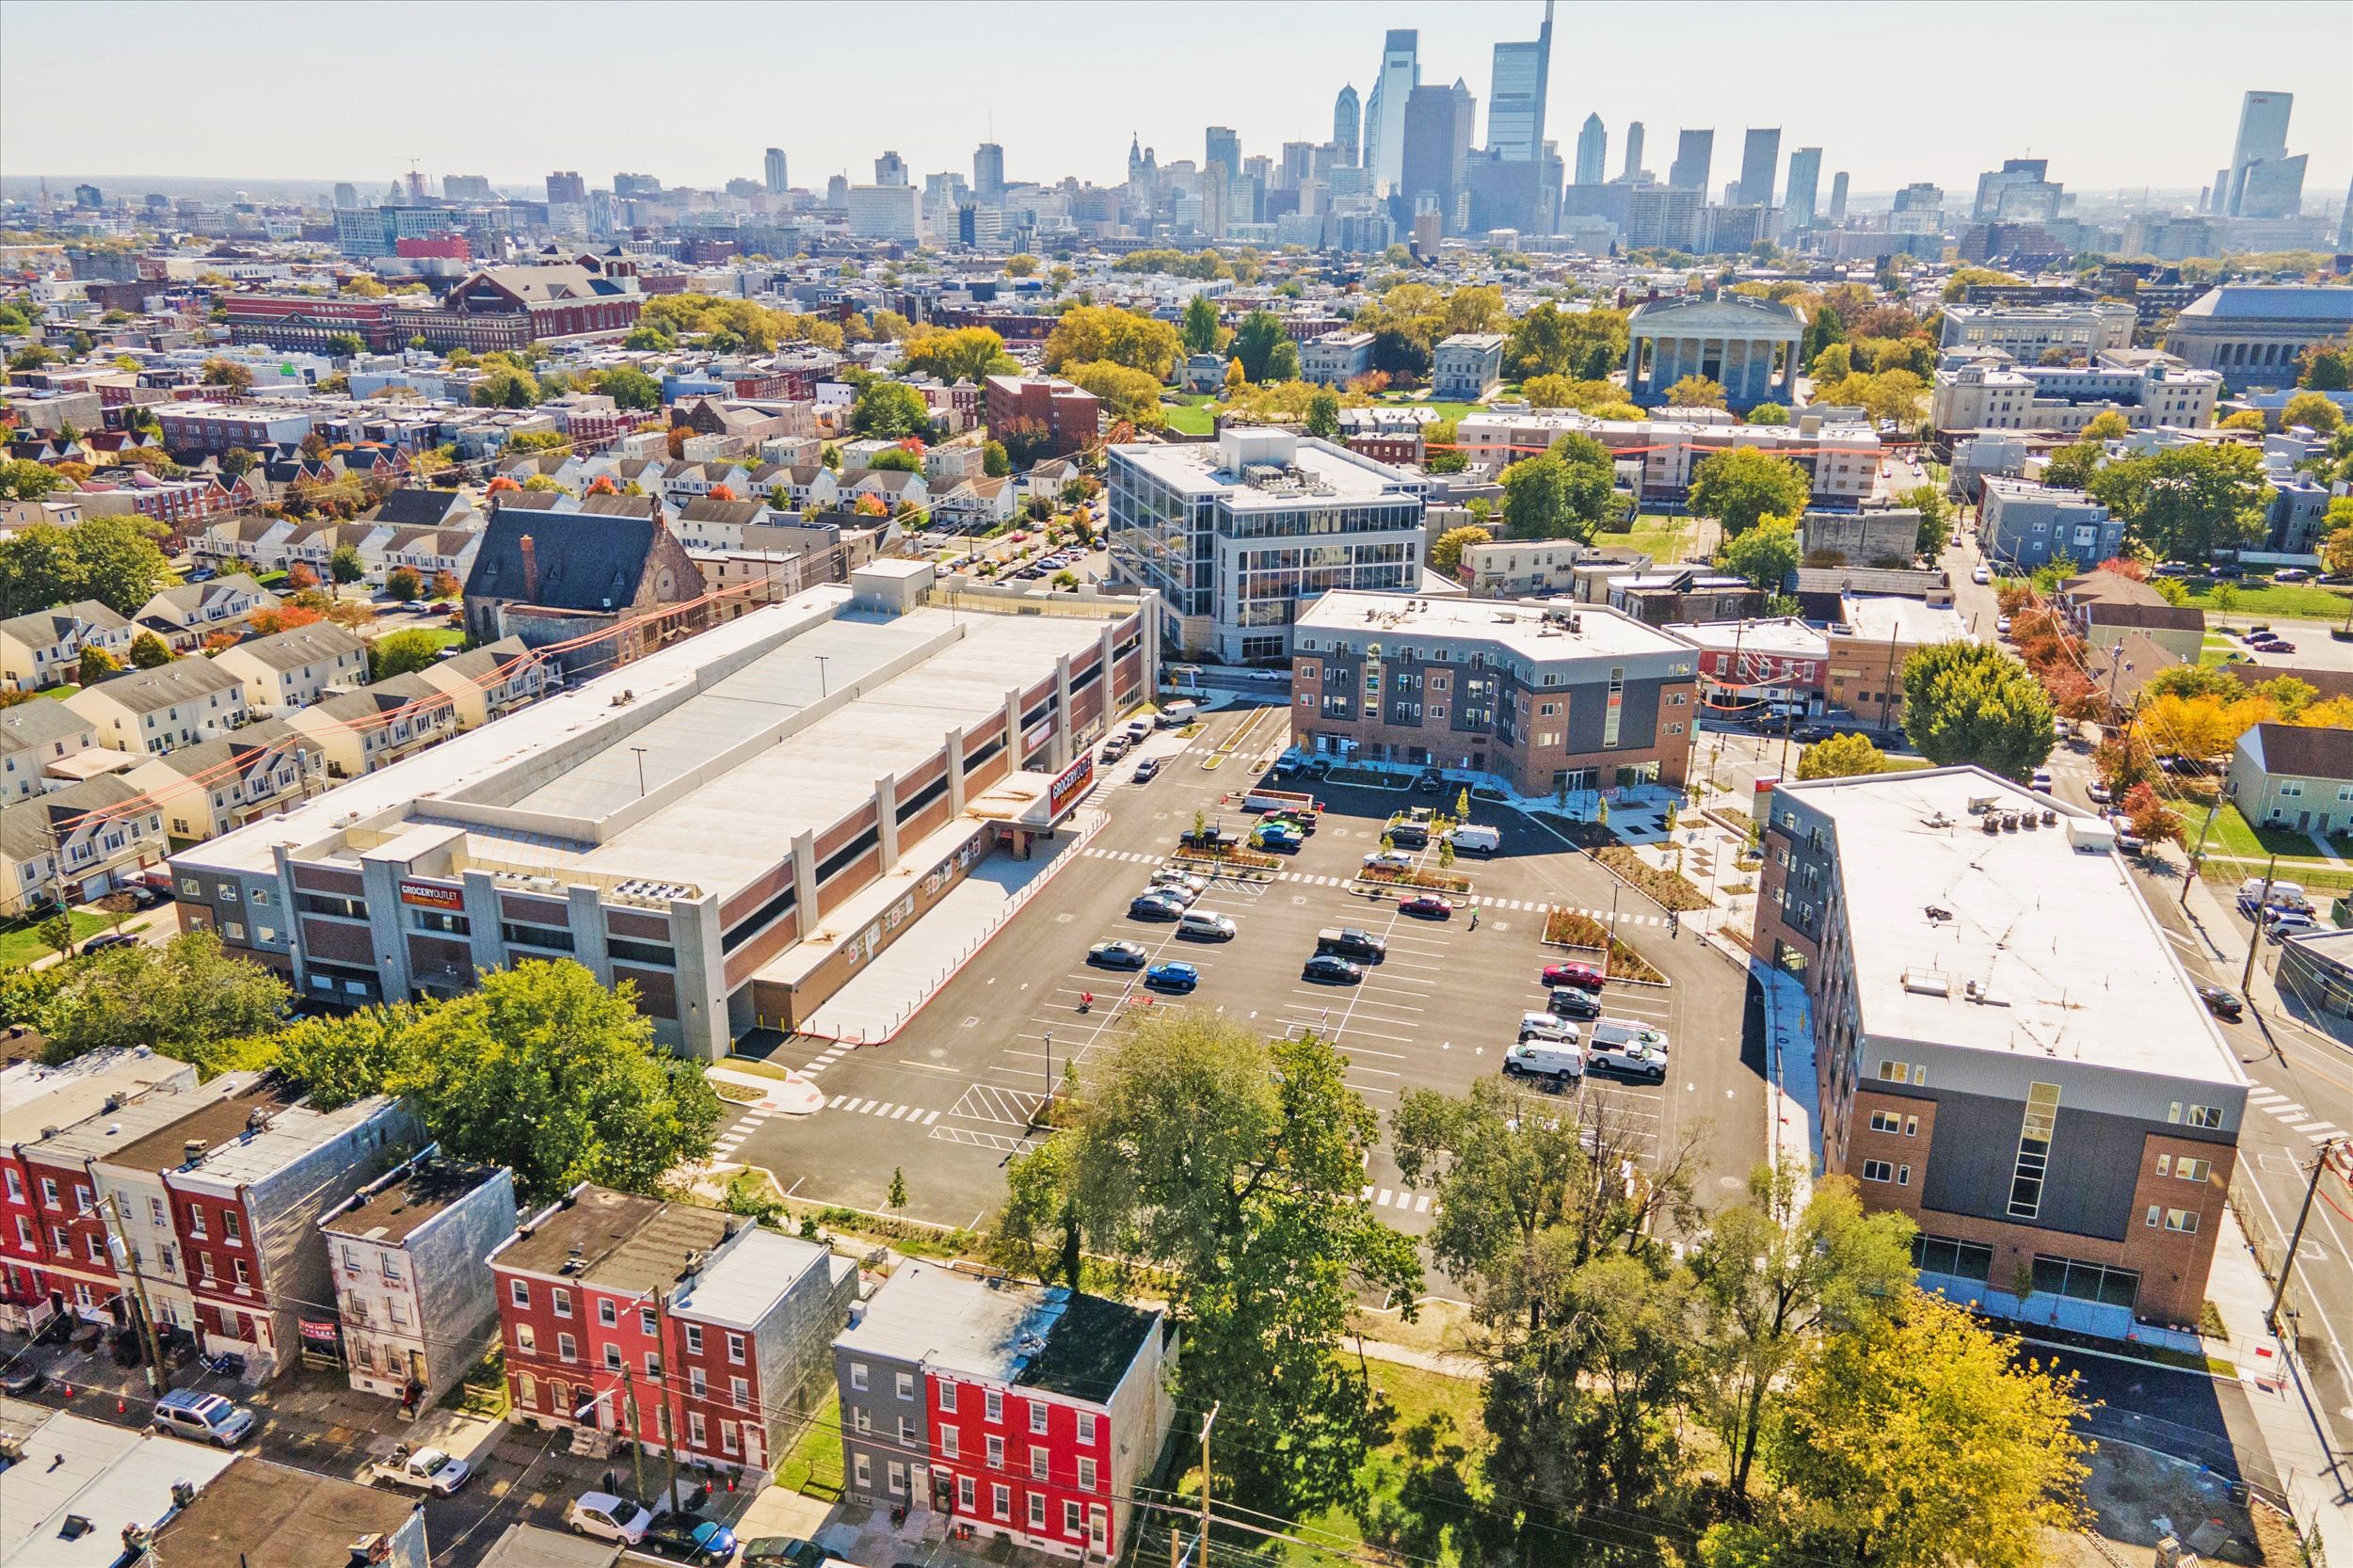 Sharswood Ridge Aerial Site Looking at Center City.jpg